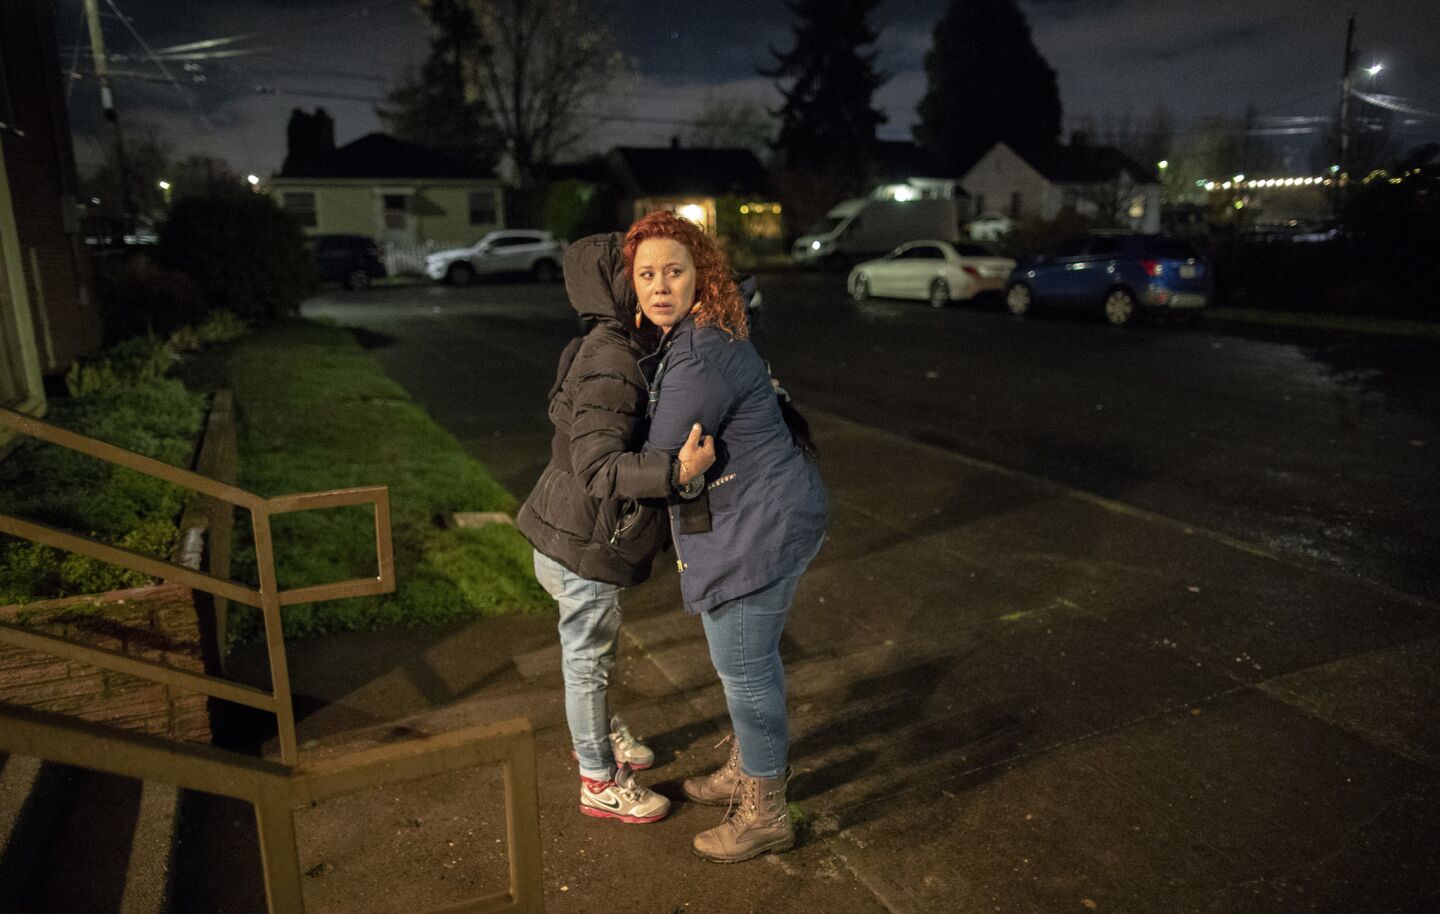 Montavilla Initiative Chairwoman Angela Todd, right, embraces homeless woman Nina Lopez, whom she met on the street while on a foot patrol with her group in Portland, Ore.